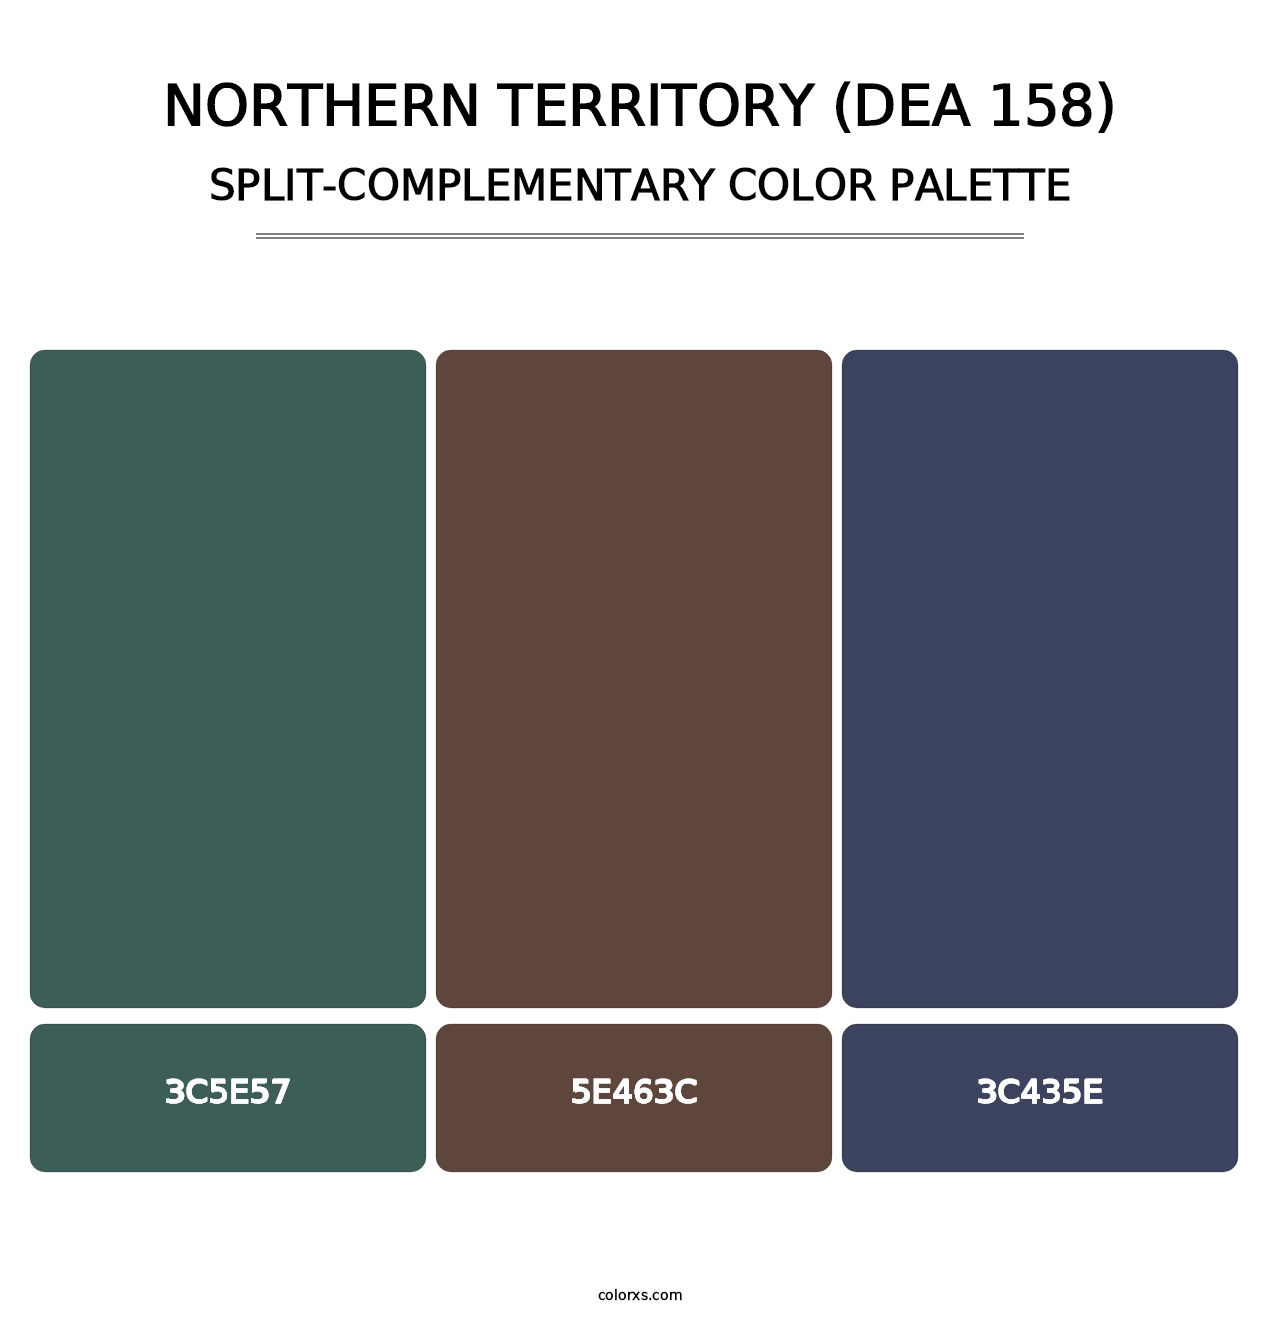 Northern Territory (DEA 158) - Split-Complementary Color Palette